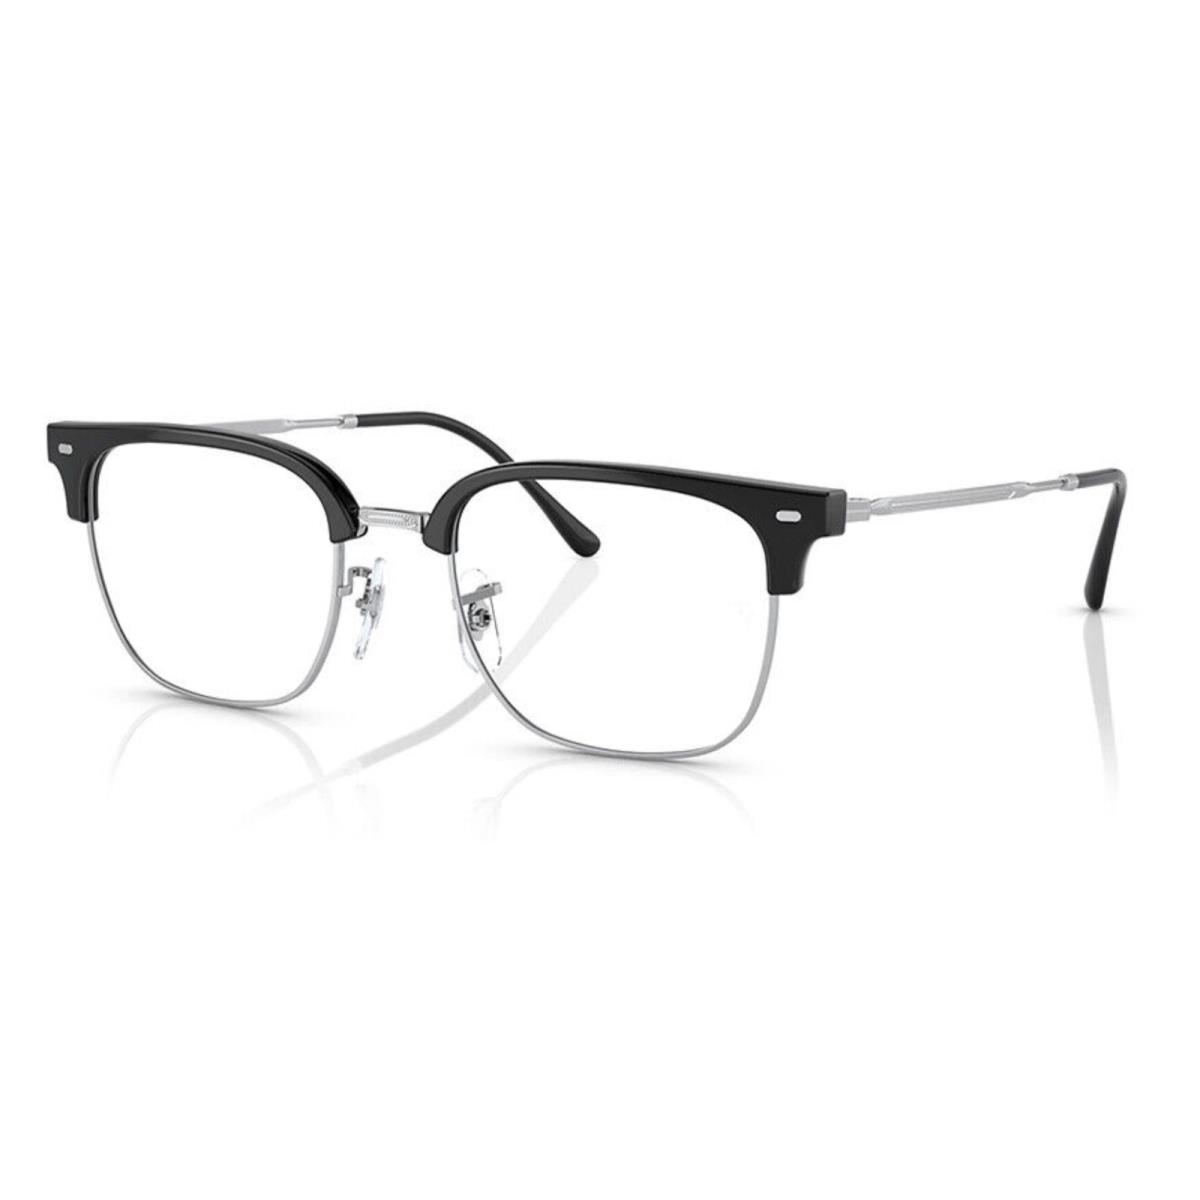 Ray-ban Clubmaster Rx-able Eyeglasses RB 7216 2000 49-20 Black Silver Frames